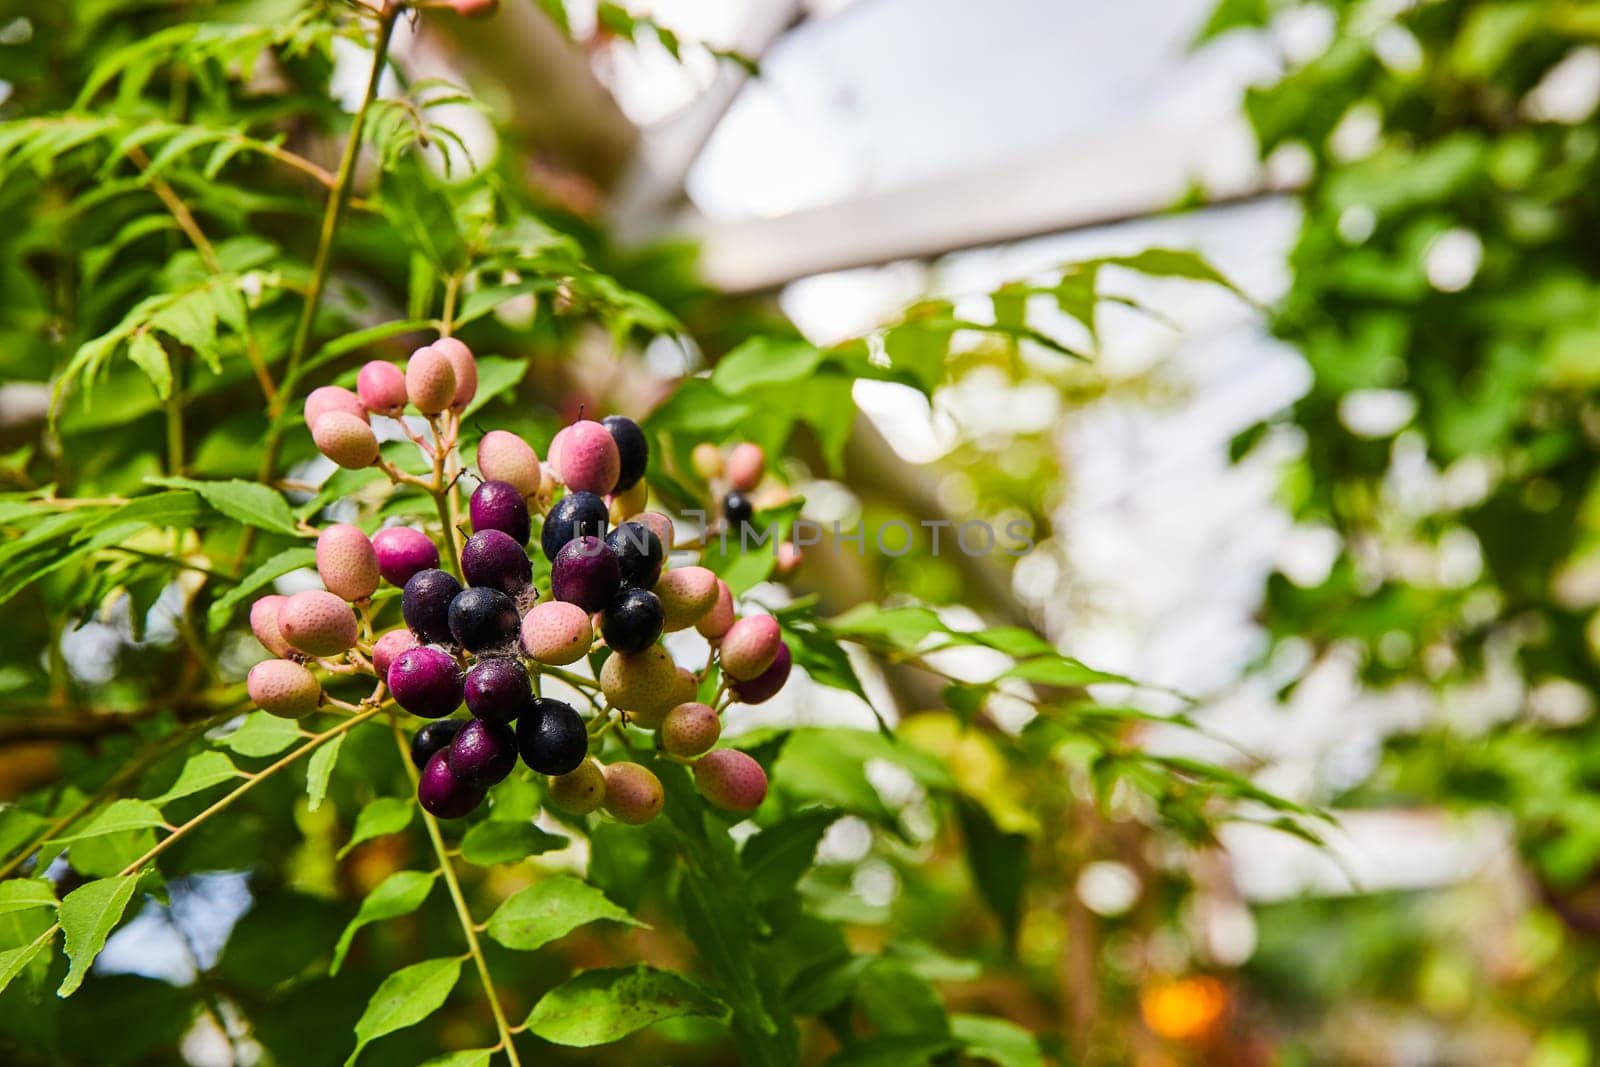 Vibrant Berries in Progressive Ripeness with Bokeh Foliage Background by njproductions